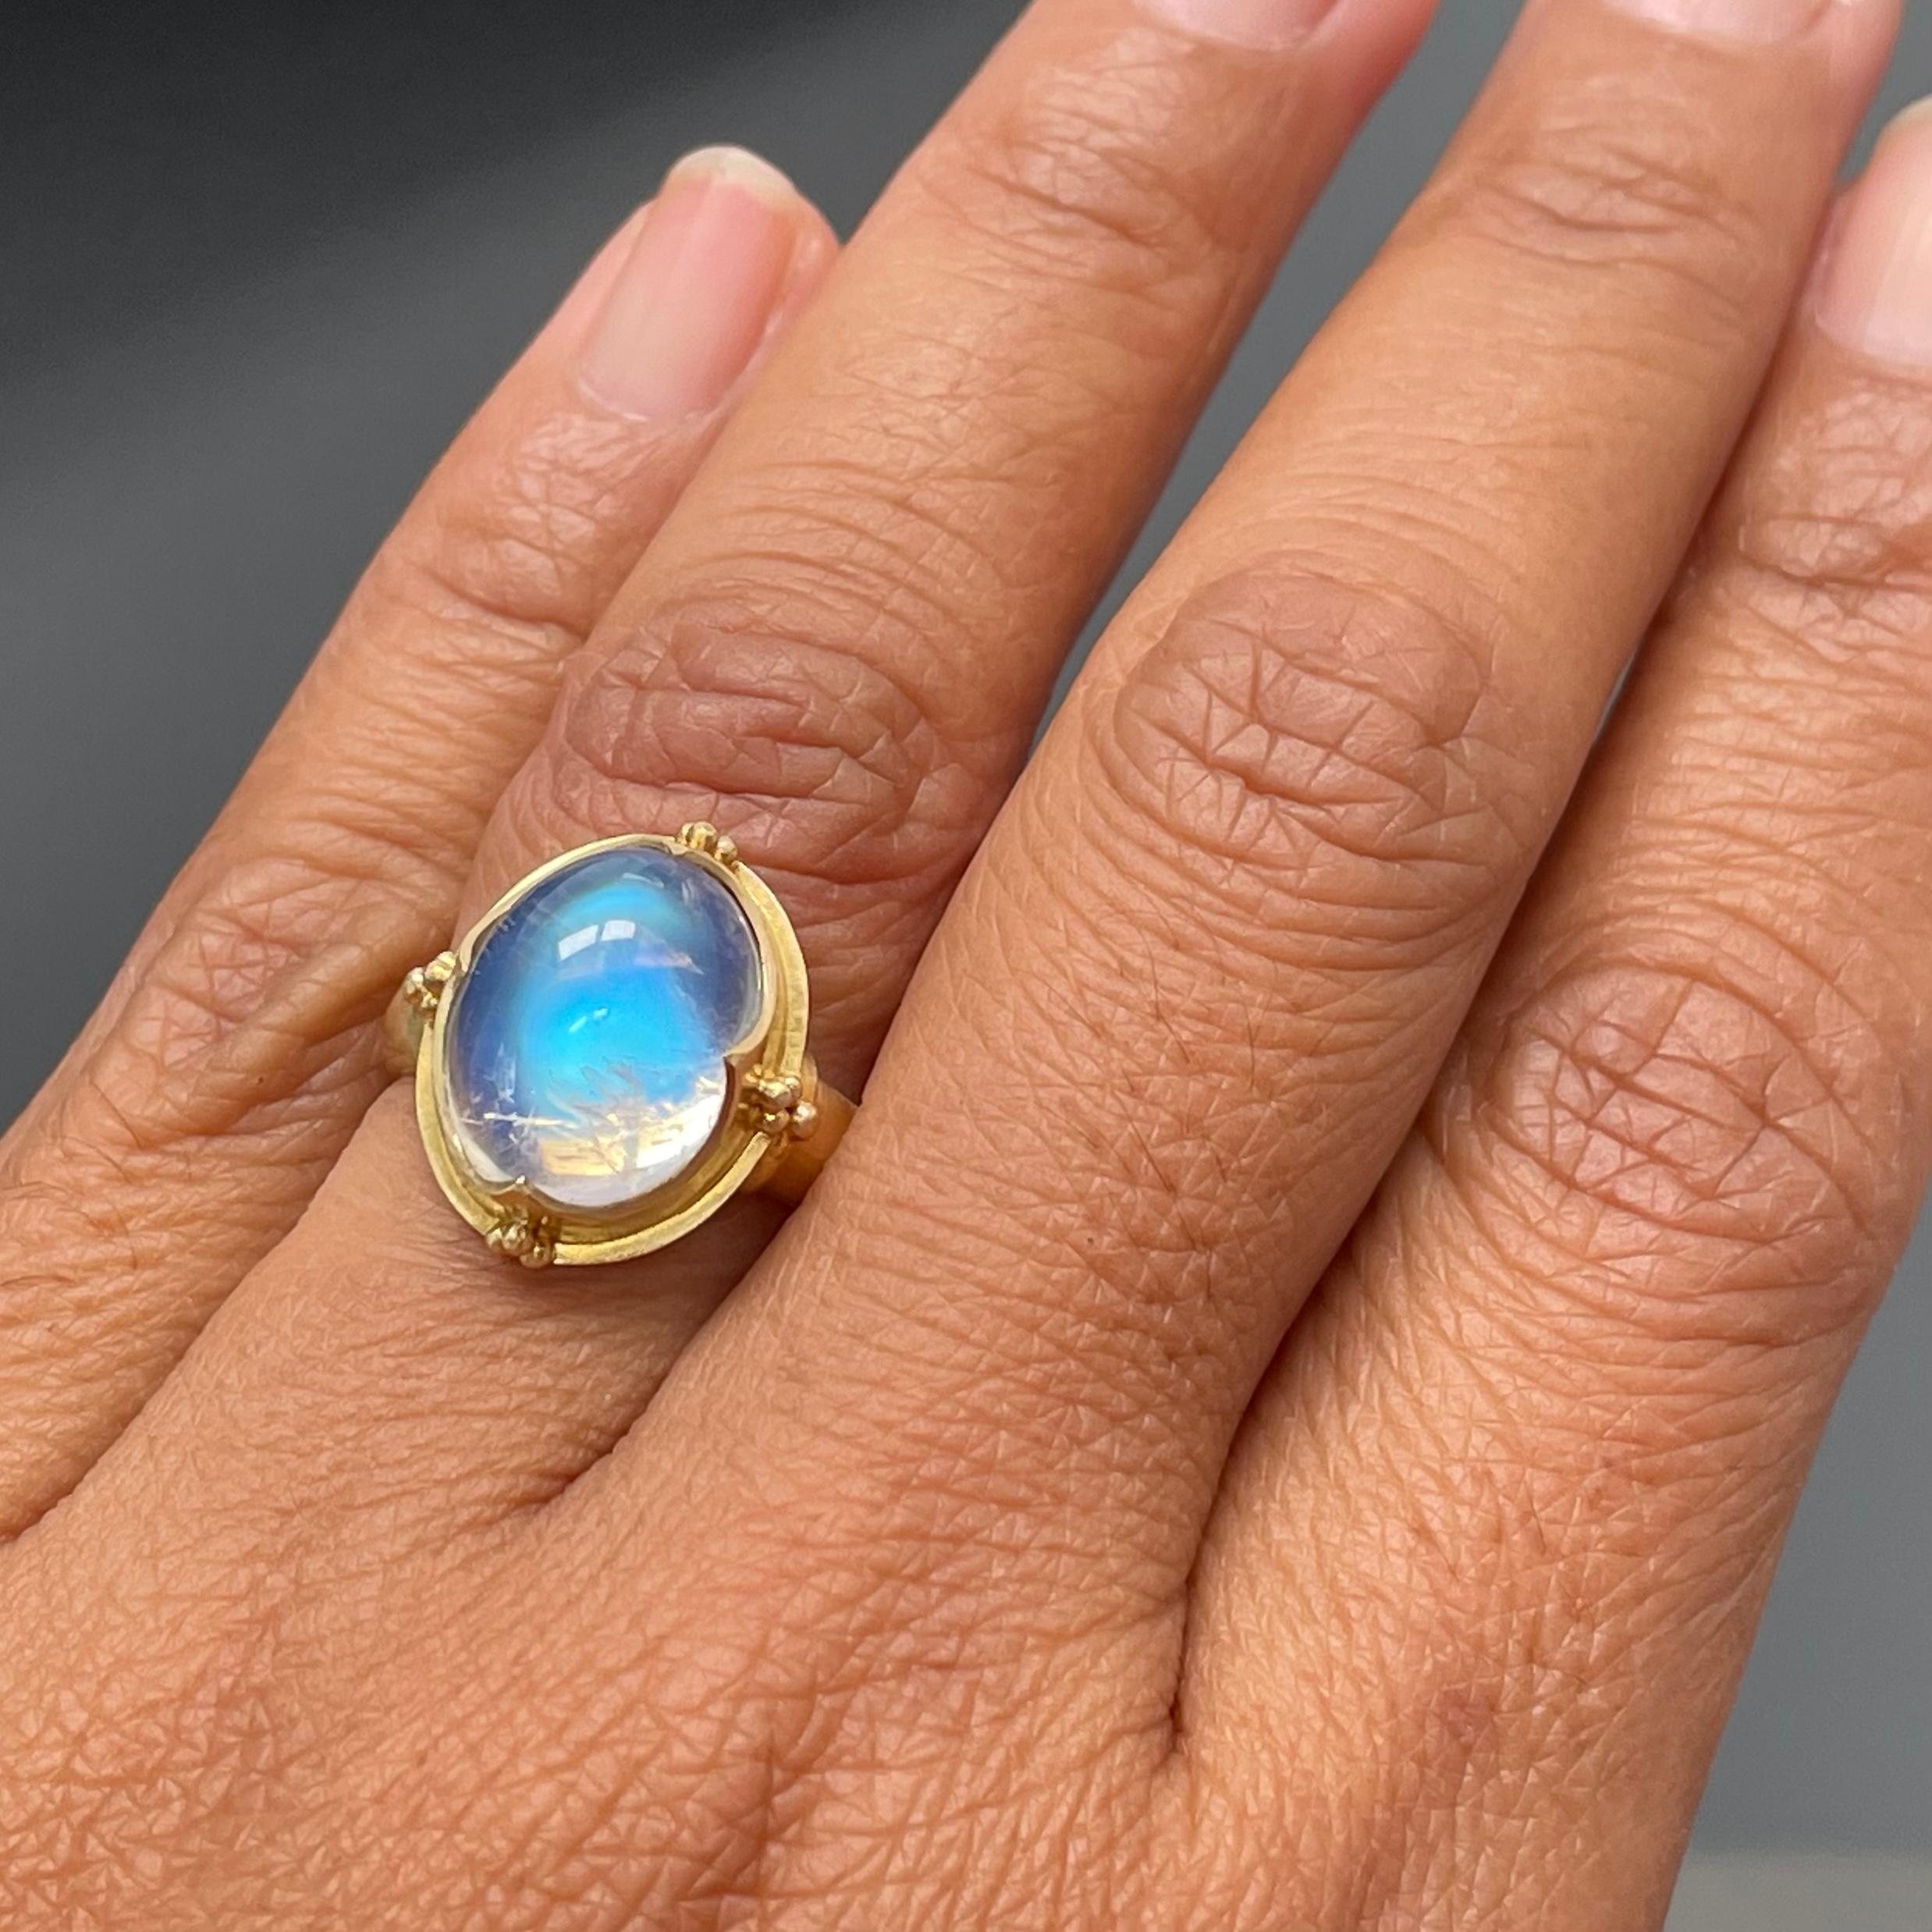 mood ring from my girl